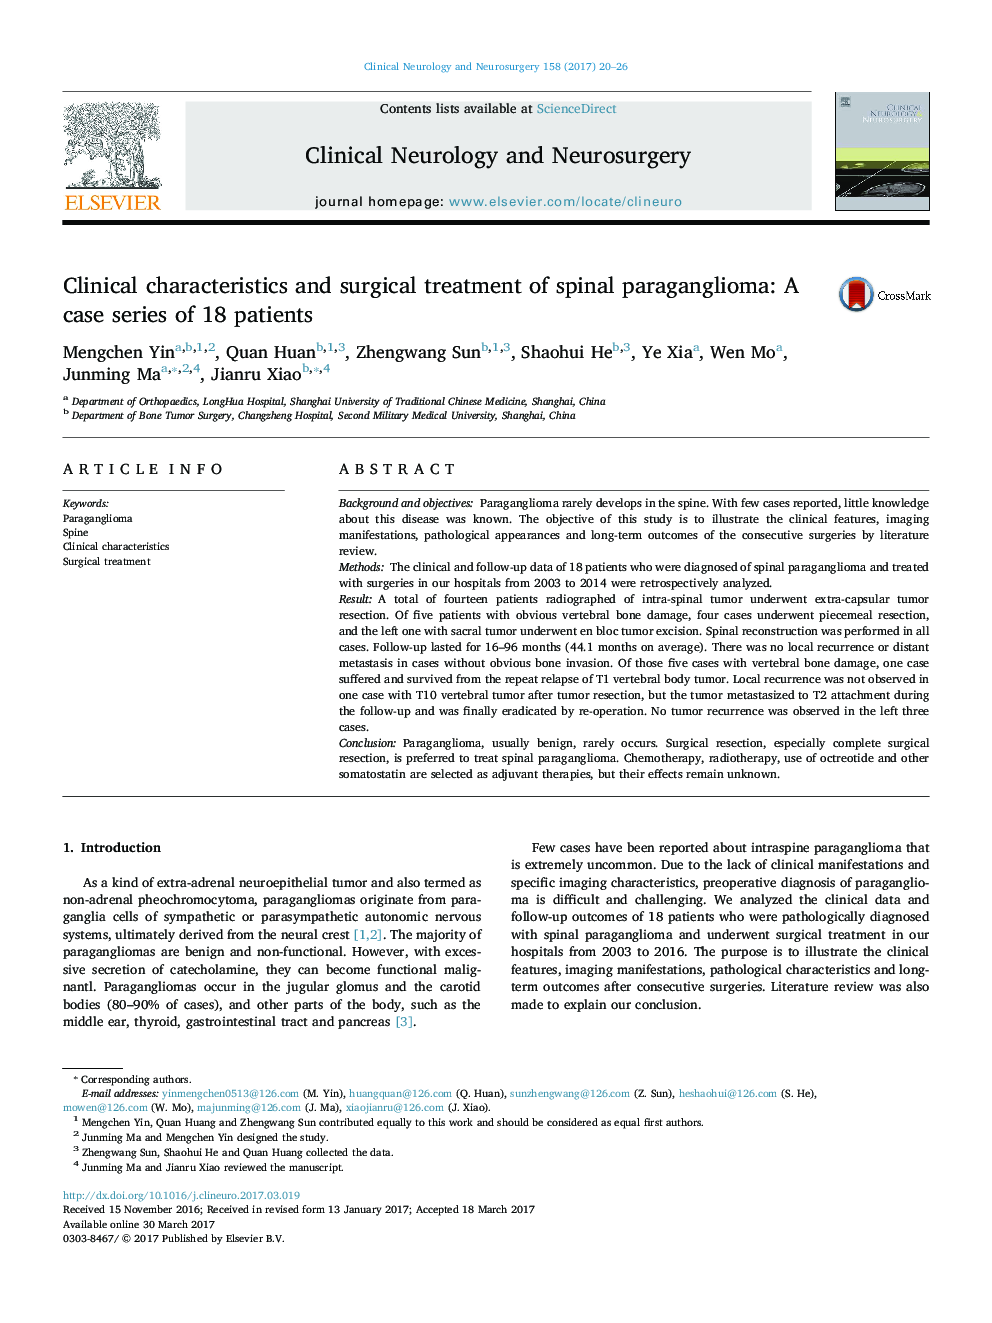 Clinical characteristics and surgical treatment of spinal paraganglioma: A case series of 18 patients